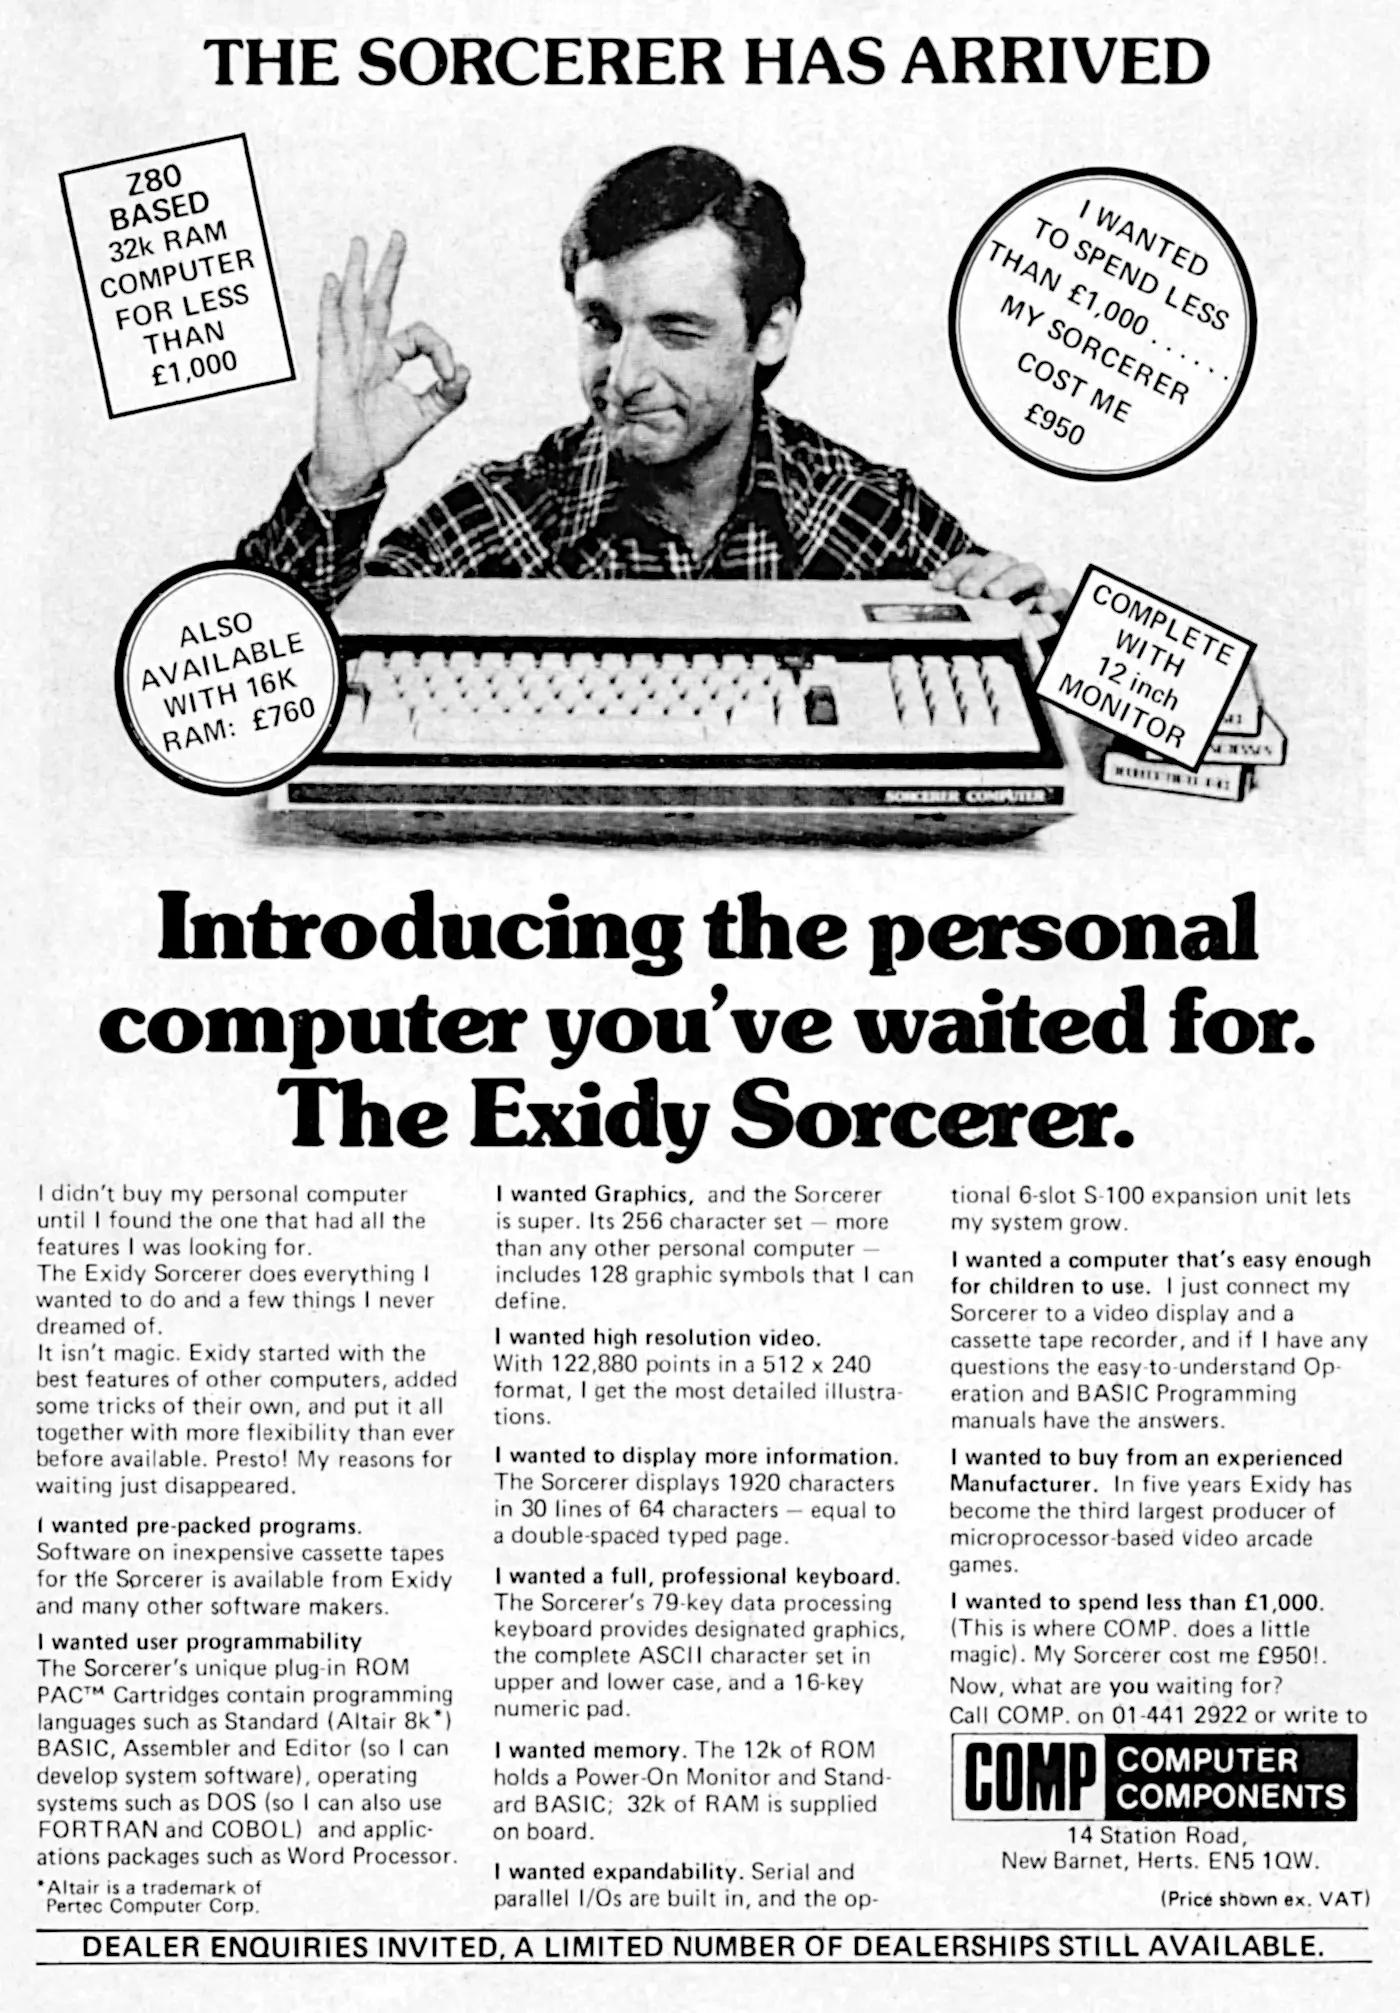 Exidy Advert: Introducing the personal computer you've been waiting for: The Exidy Sorcerer, from Personal Computer World, January 1979